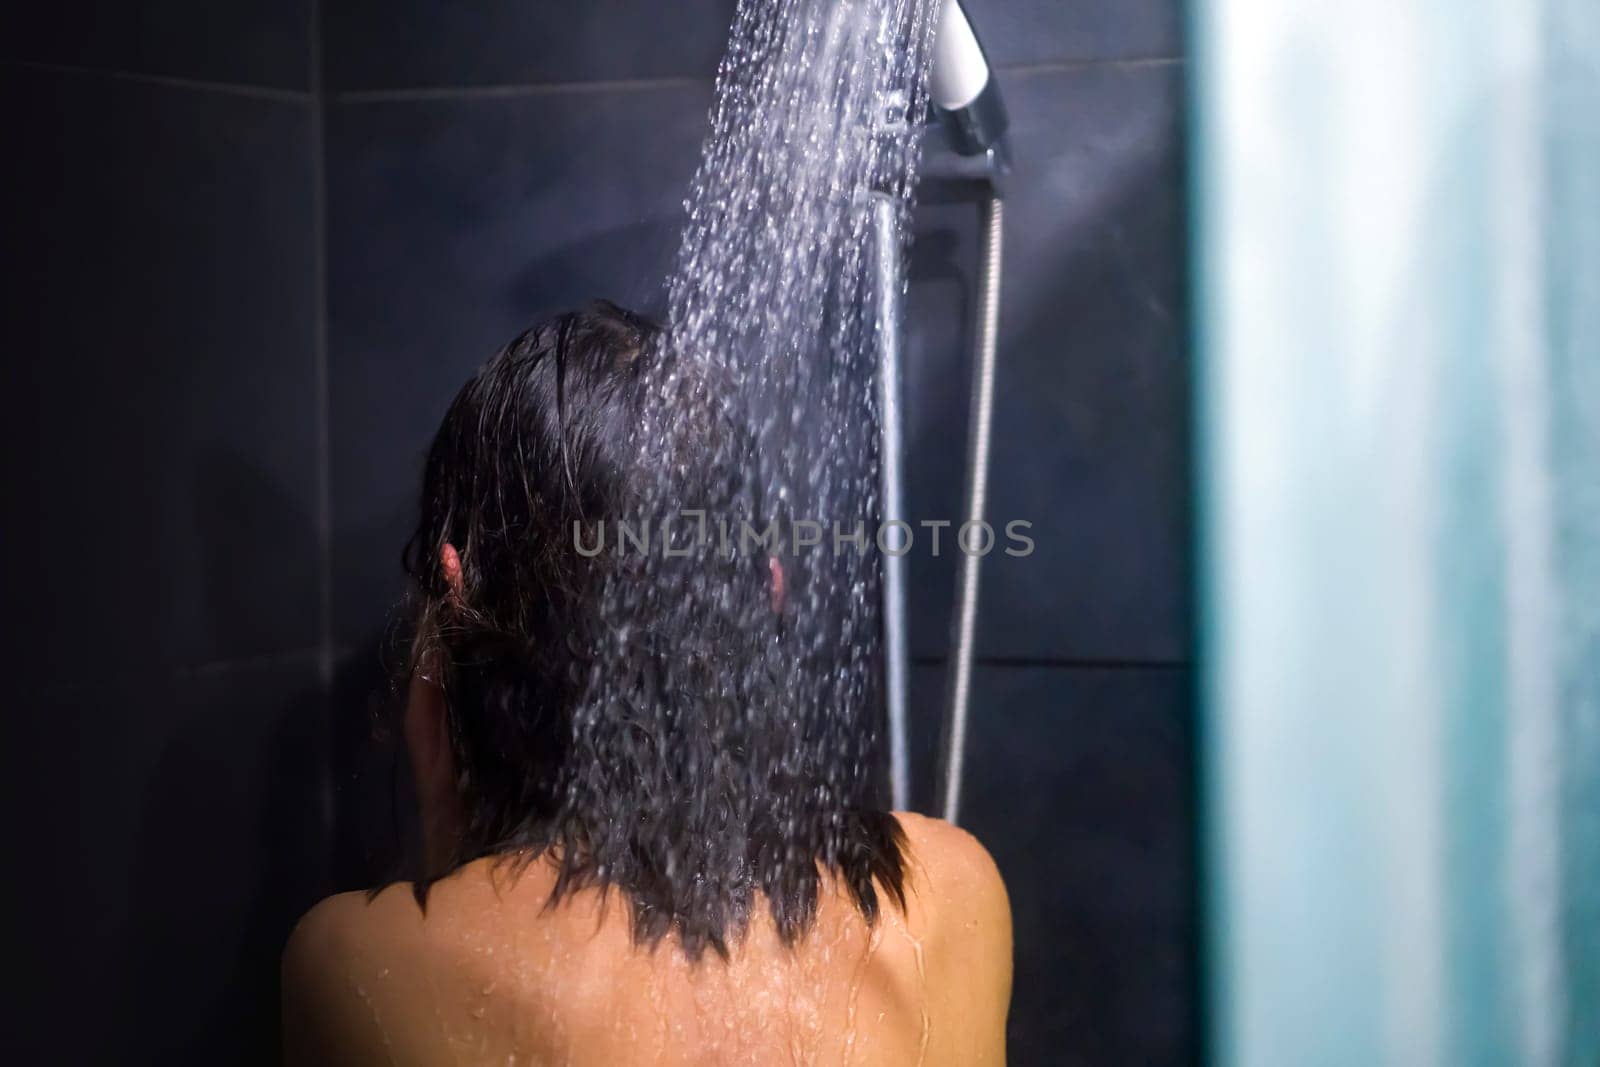 A young girl takes a shower with shampoo and soap, washes her hair, takes care of her body, hygiene and cleanliness in a modern gray shower room.